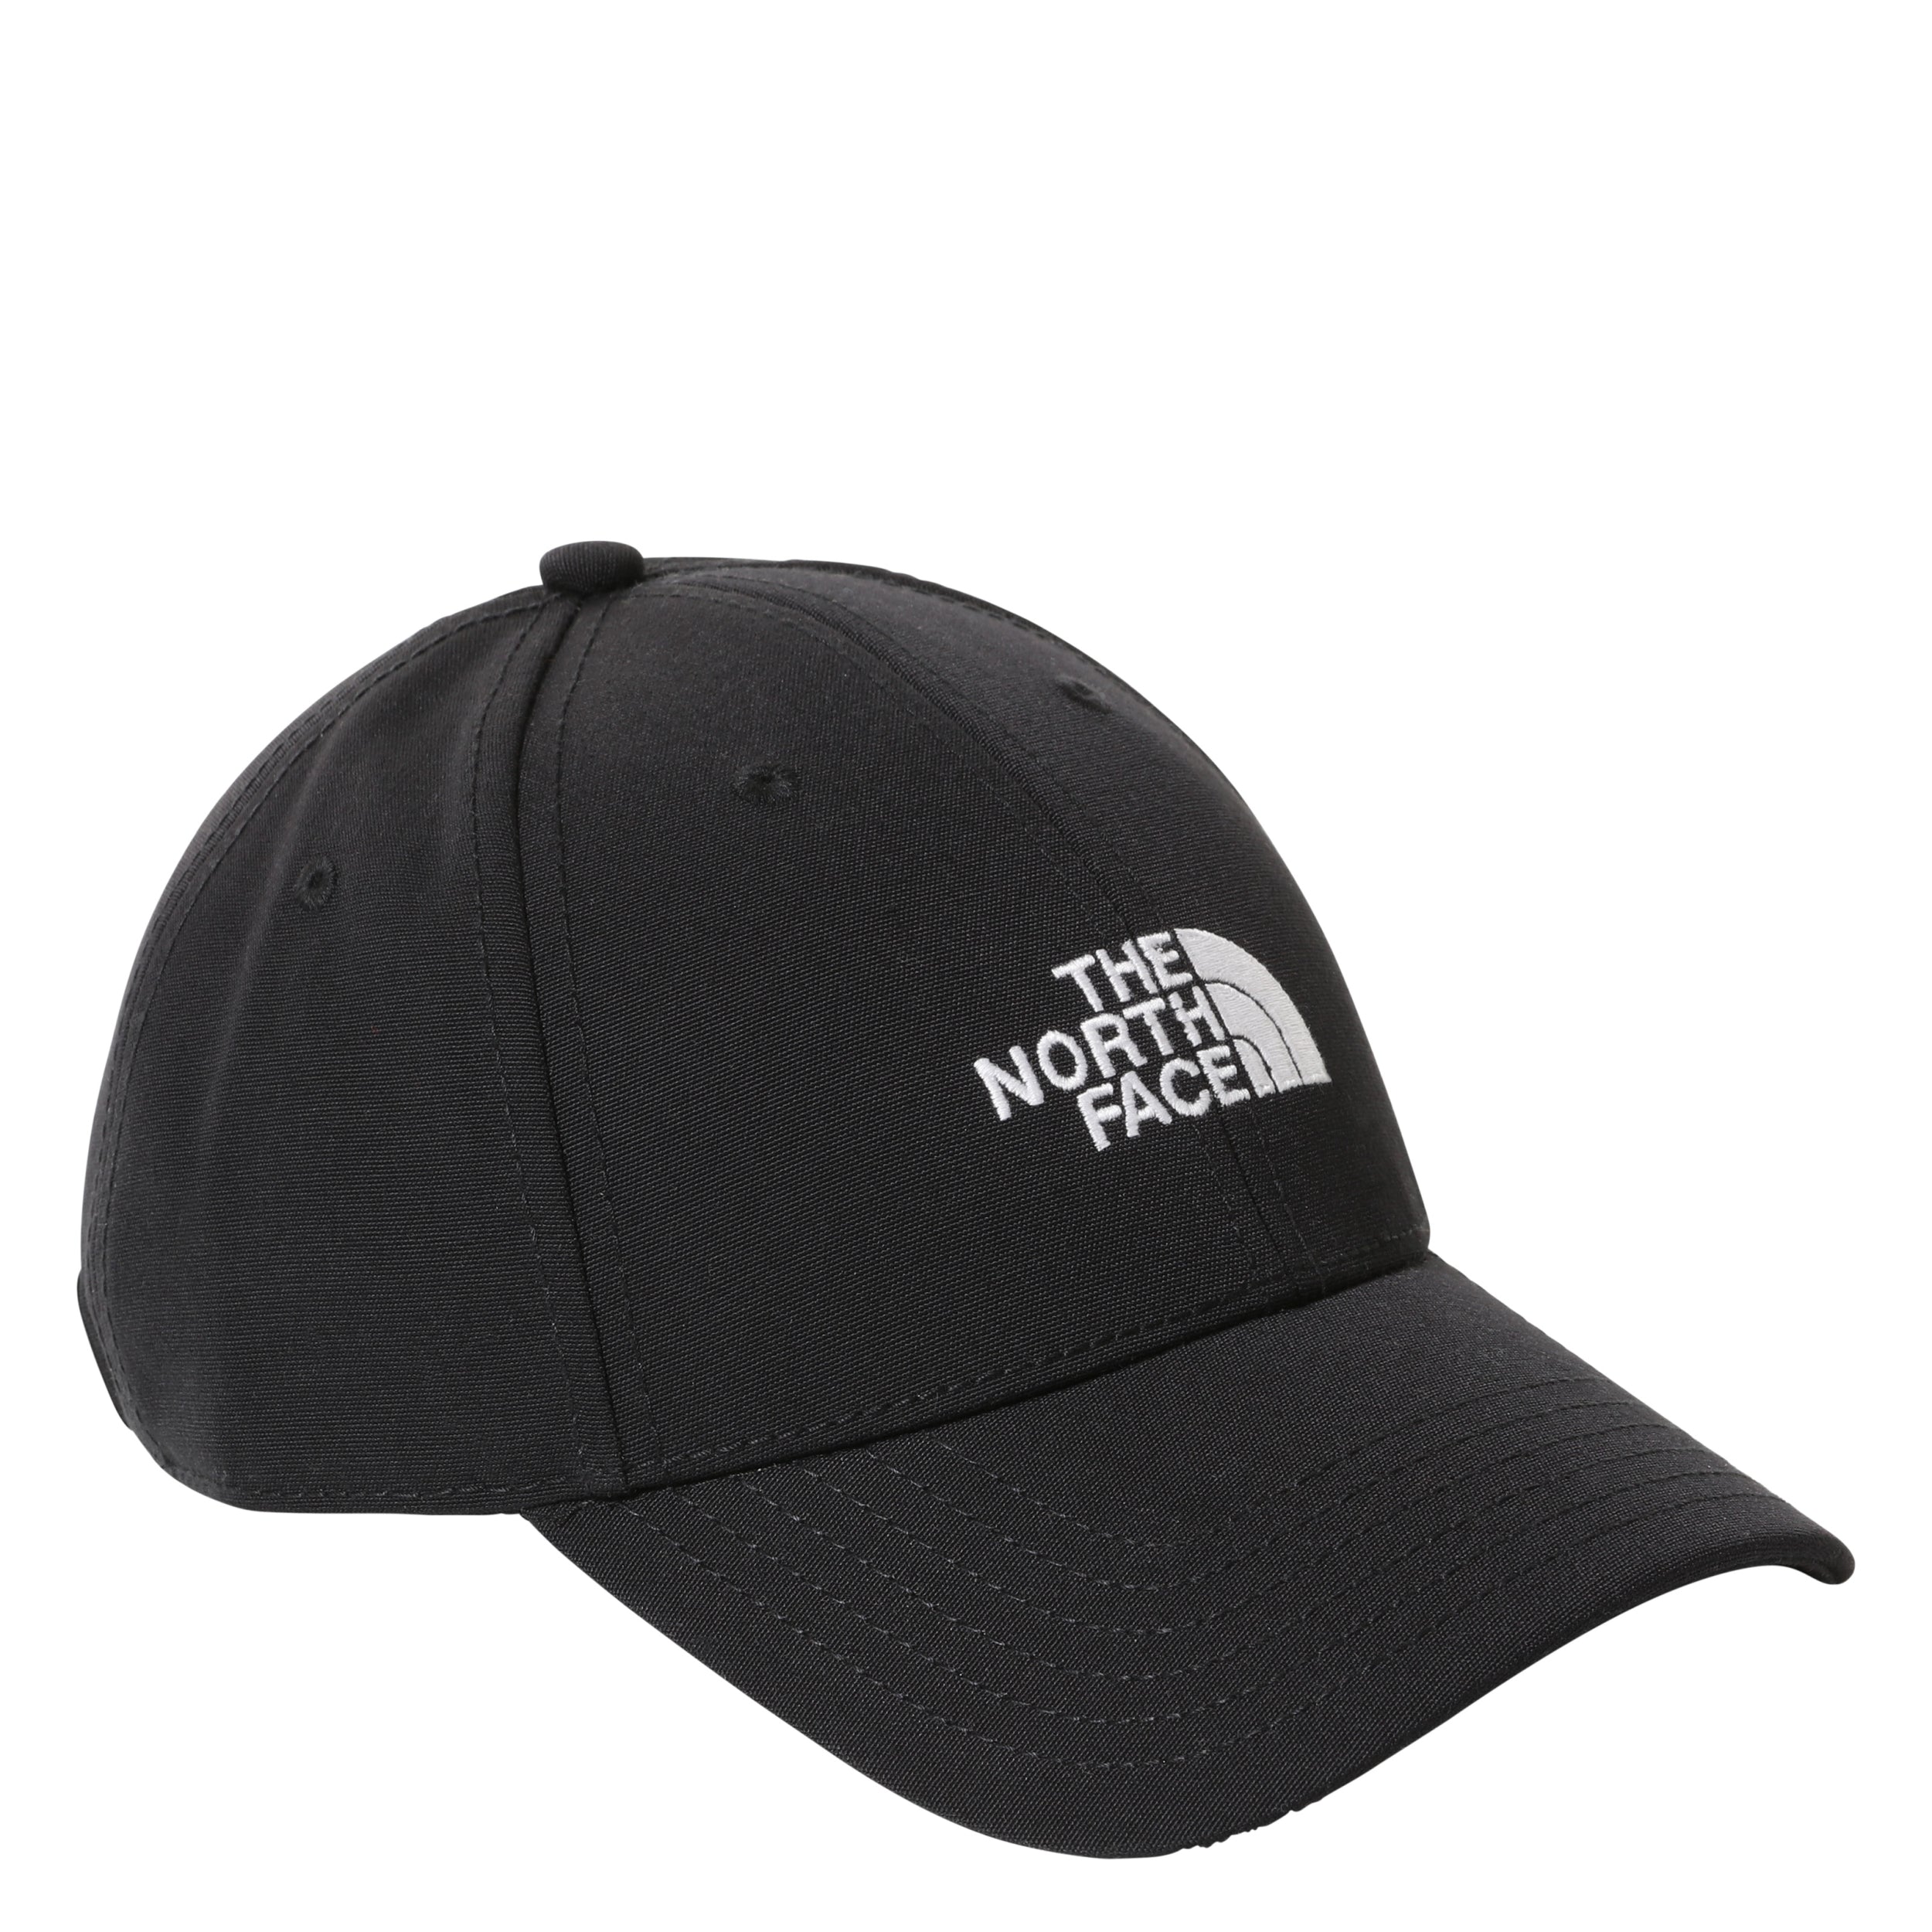 THE NORTH FACE RECYCLED HAT– Kuhn 66 CLASSIC Sport